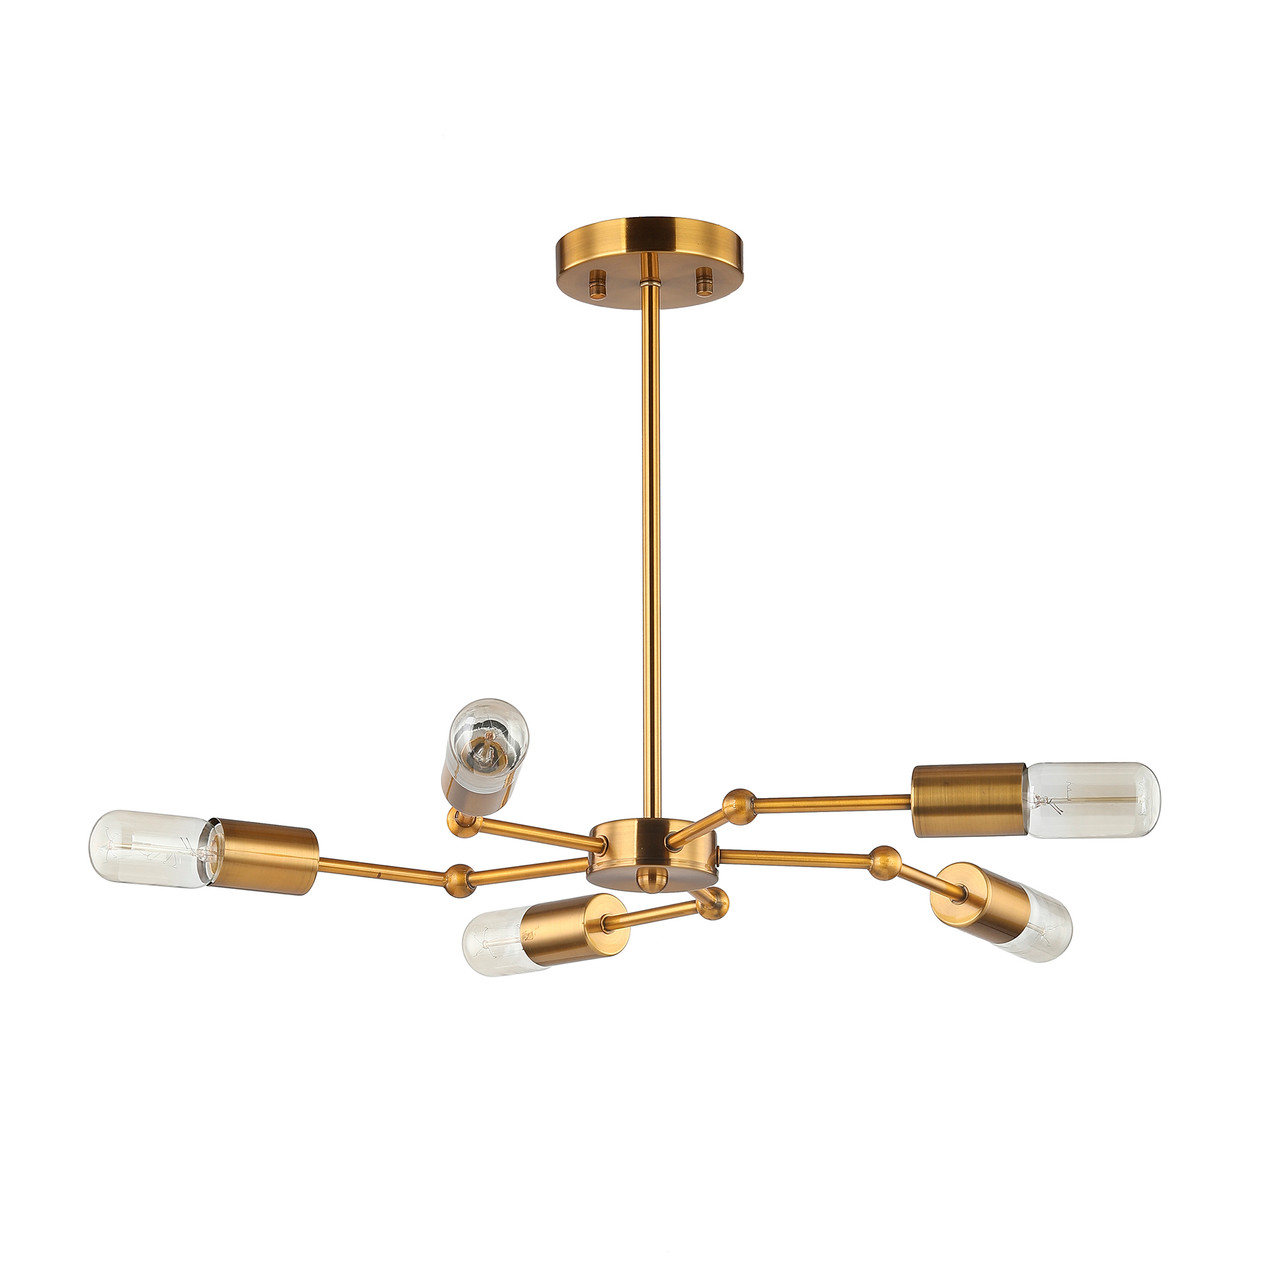 WAREHOUSE OF TIFFANY'S P-180631 Yuyor 28.5 in. 5-Light Indoor Brass Finish Chandelier with Light Kit